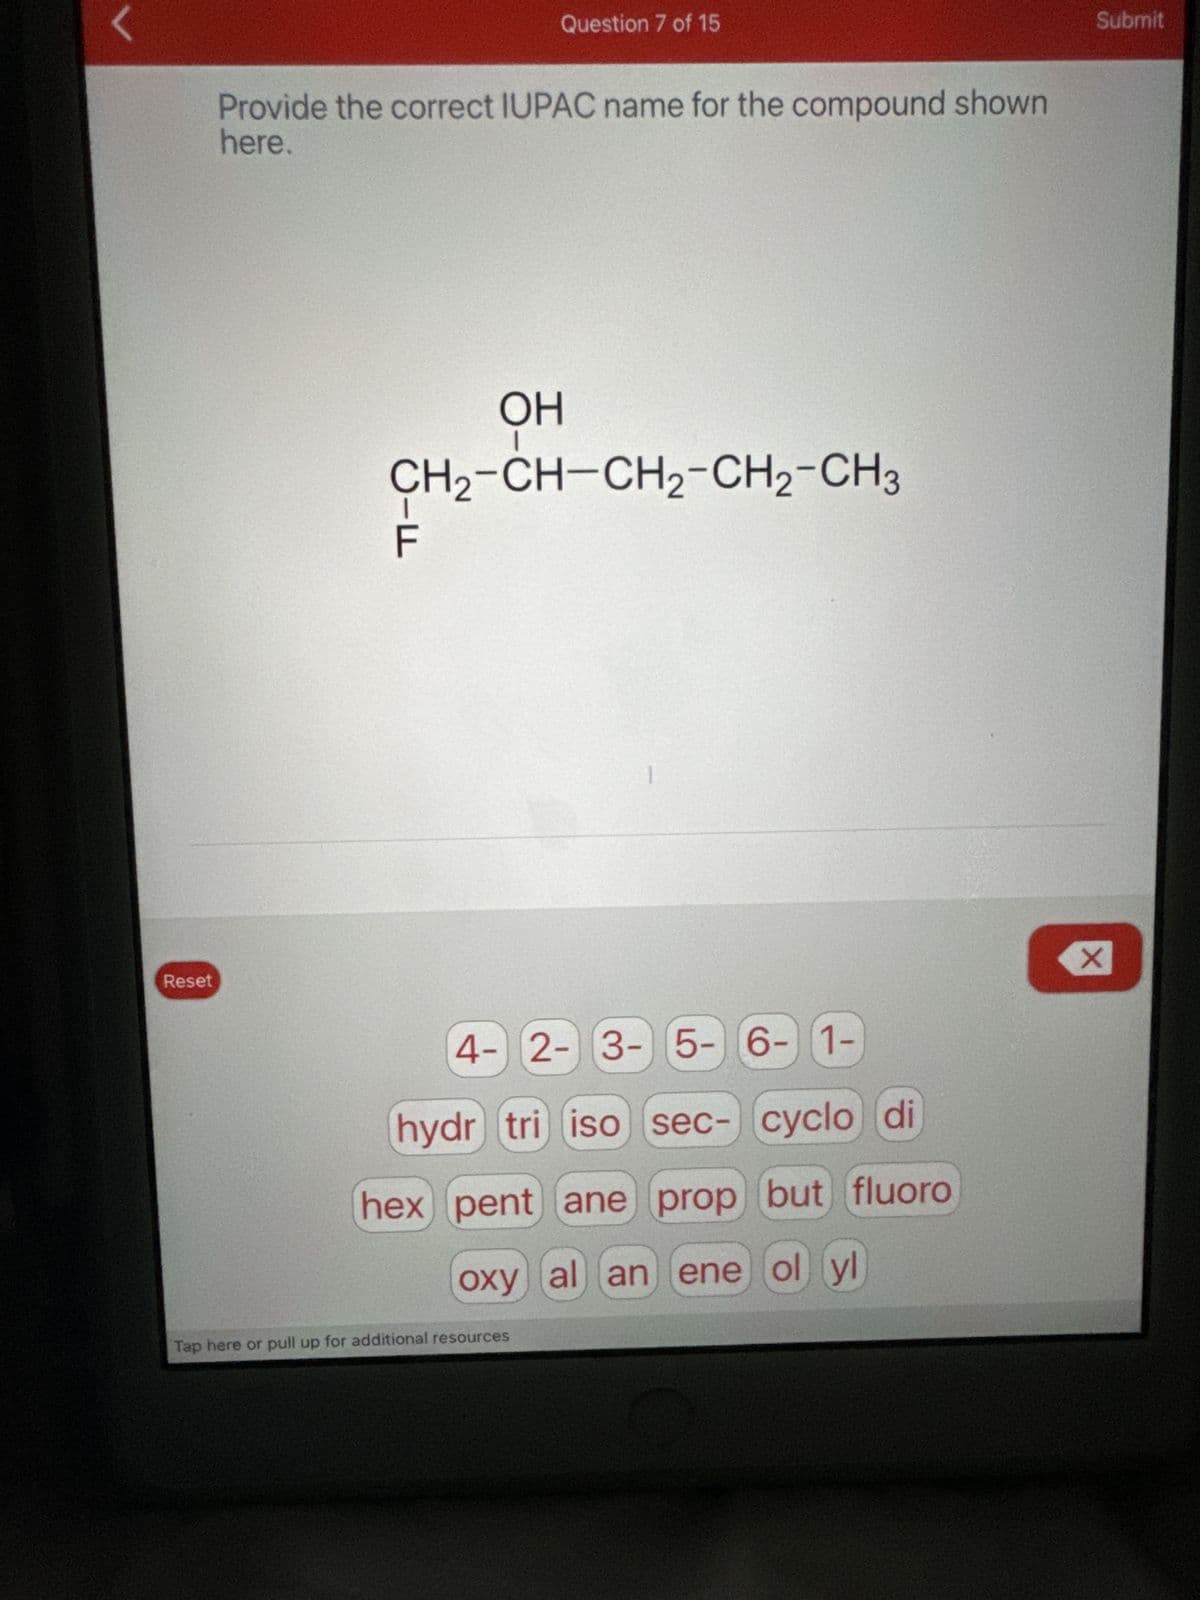 Reset
Question 7 of 15
Provide the correct IUPAC name for the compound shown
here.
OH
CH2-CH-CH2-CH2-CH3
ד
4-2-3-5-6-1-
hydr tri iso sec- cyclo di
hex pent ane prop but fluoro
oxy al an ene ol yl
Tap here or pull up for additional resources
☑
Submit